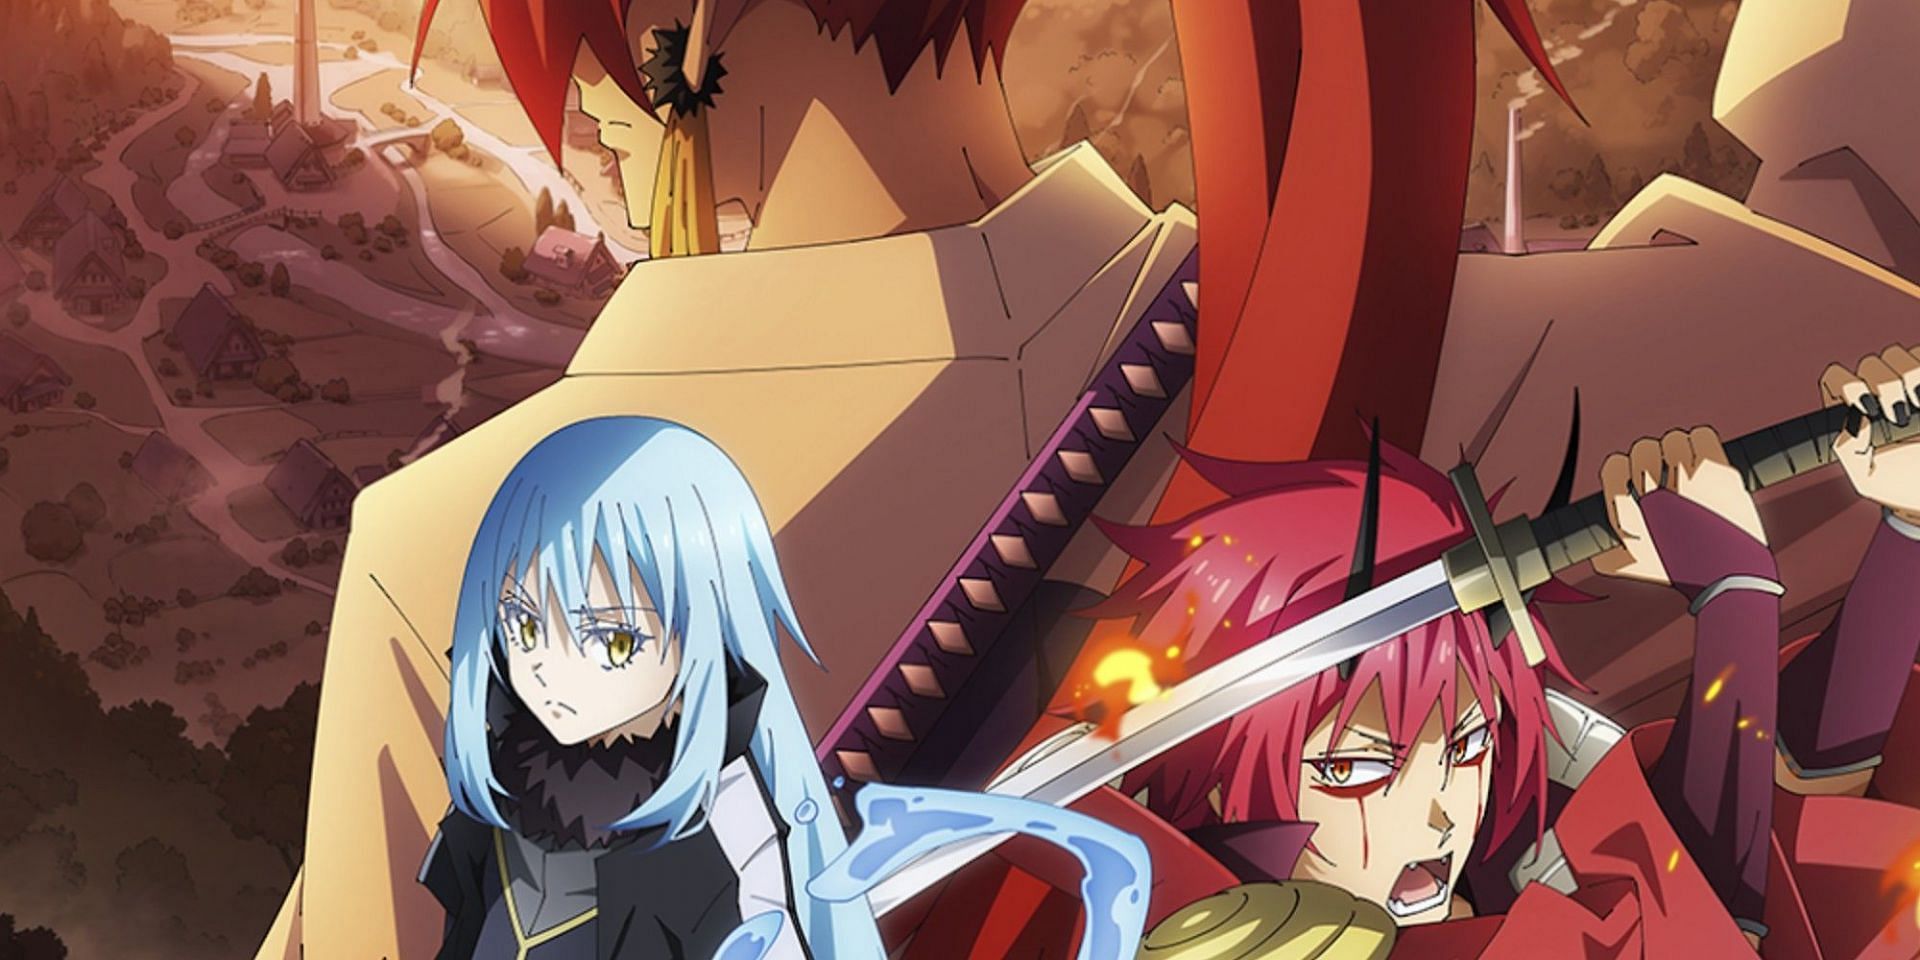 That Time I Got Reincarnated as a Slime Film Reveals Theme Song, Insert  Song Artists - News - Anime News Network